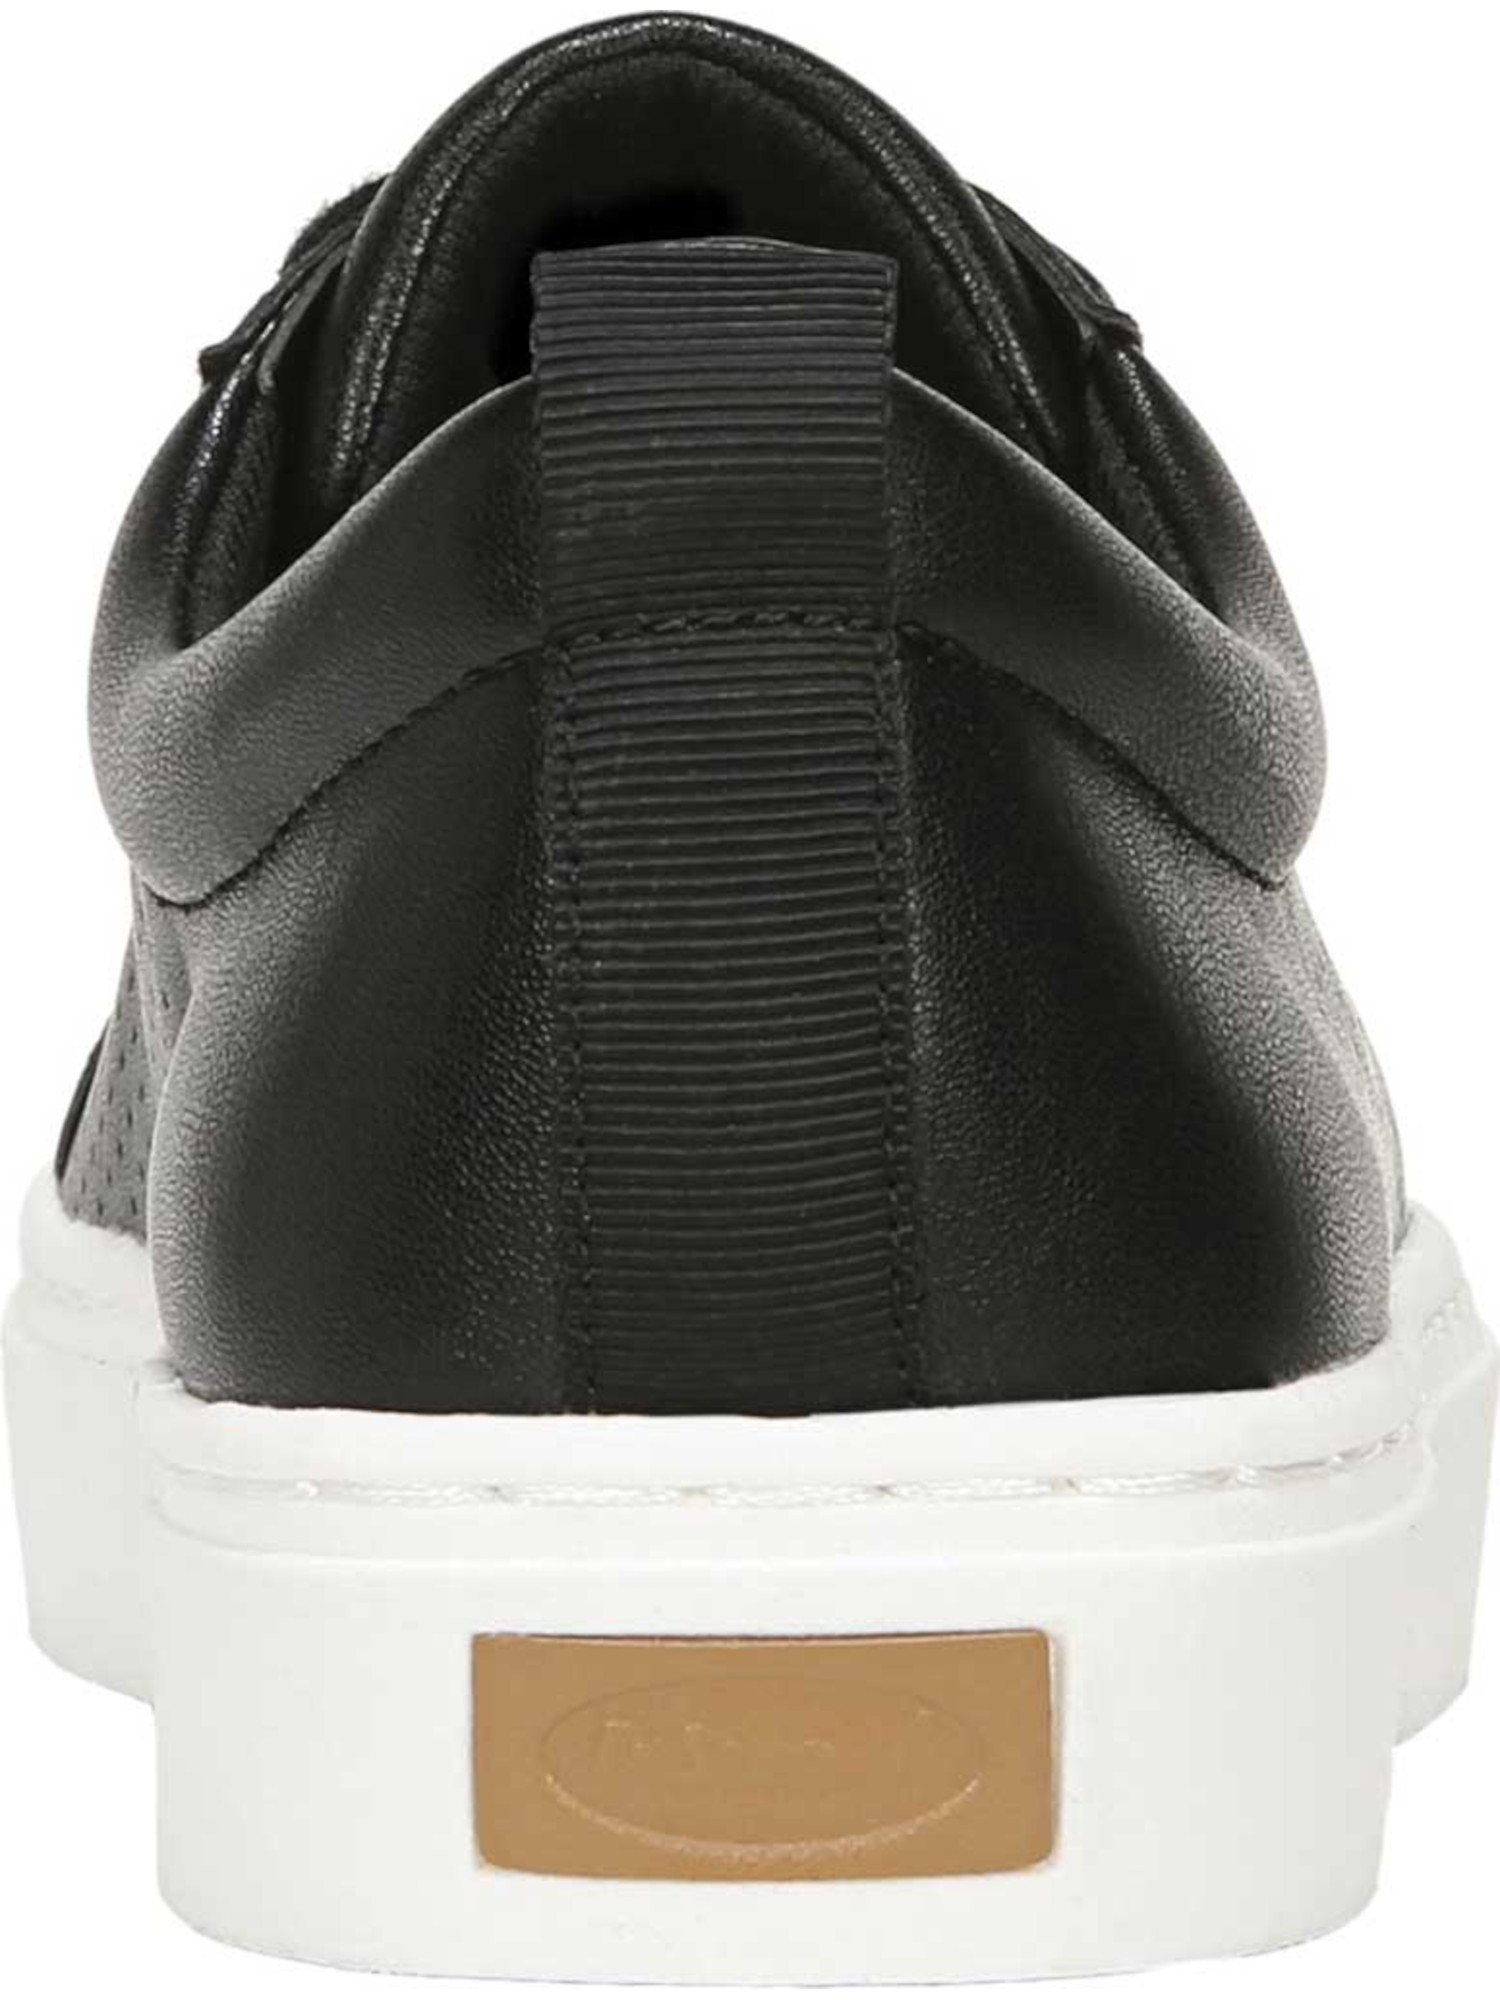 NATURALIZER Womens Black Sporty No Bad Vibes Platform Athletic Sneakers 10 M